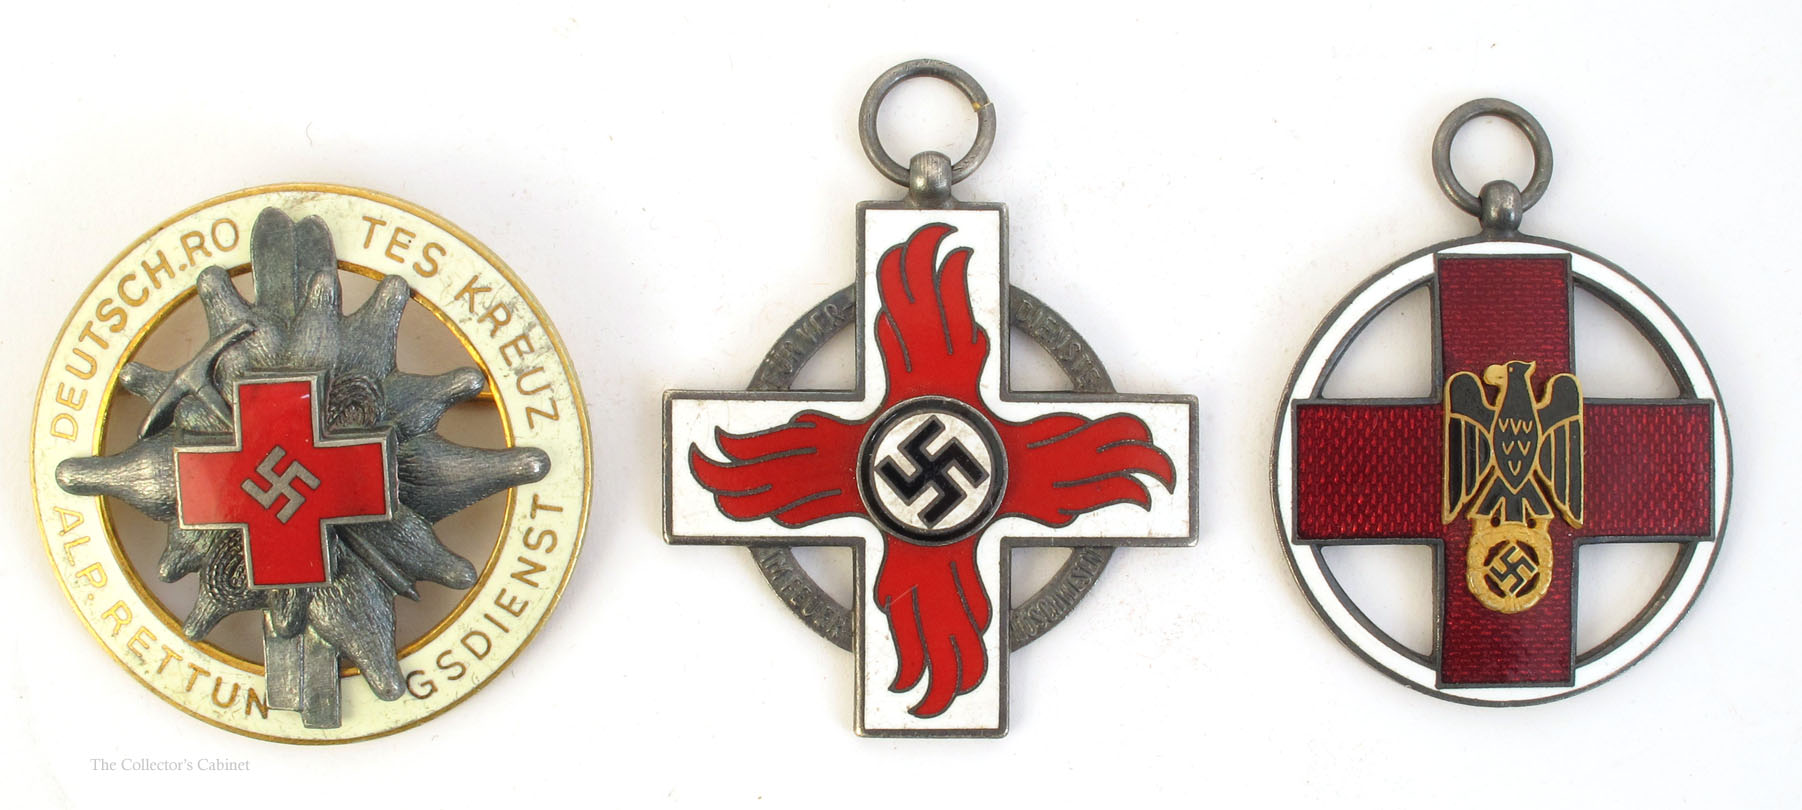 1939-45 German, a Ski Red Cross badge, a Red Cross badge and a Fire Brigade award.